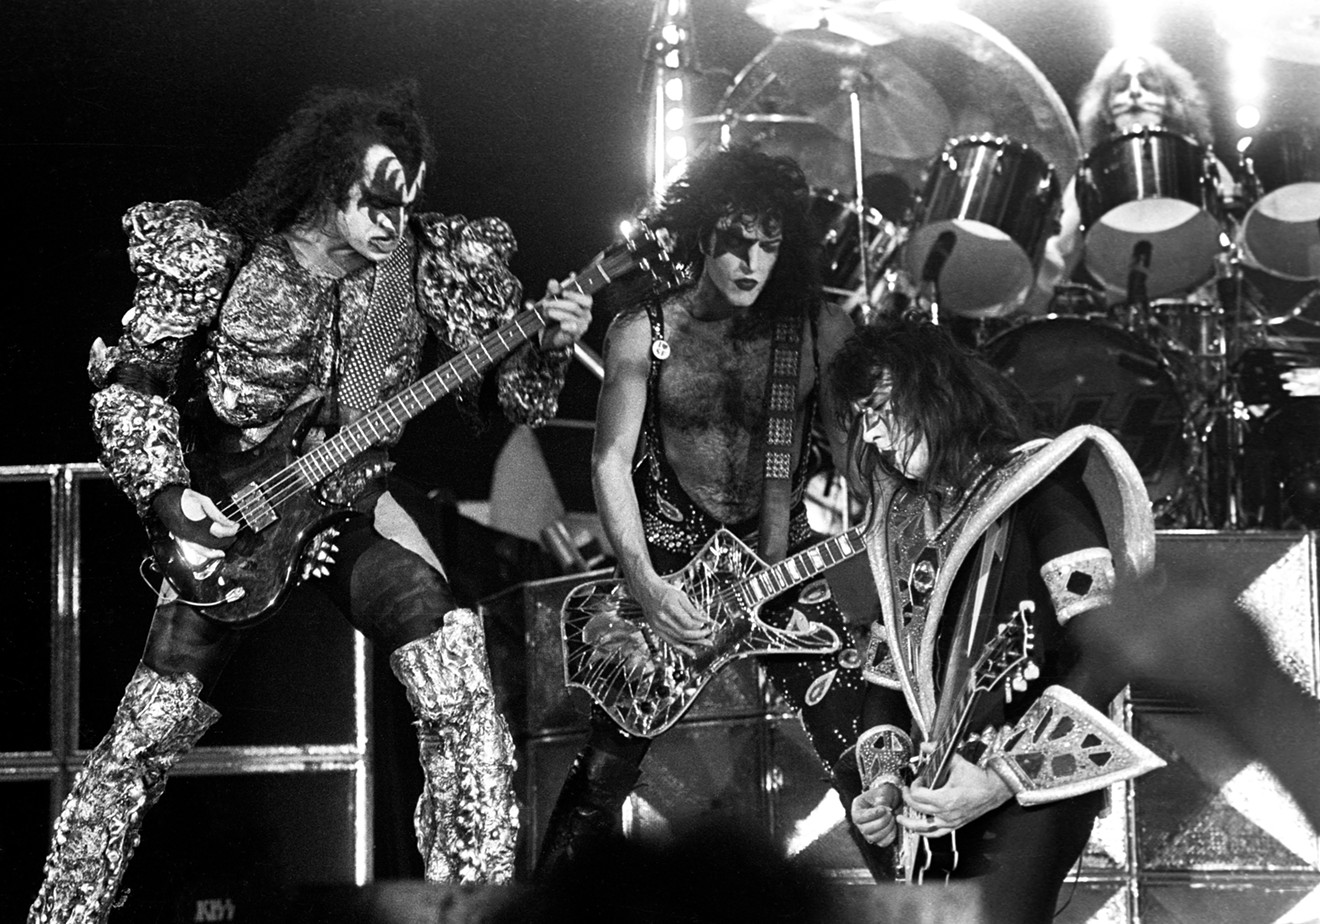 Larry Hulst started photographing concerts in ’64 and has shot bands including Led Zeppelin, Kiss (above) and the Grateful Dead.